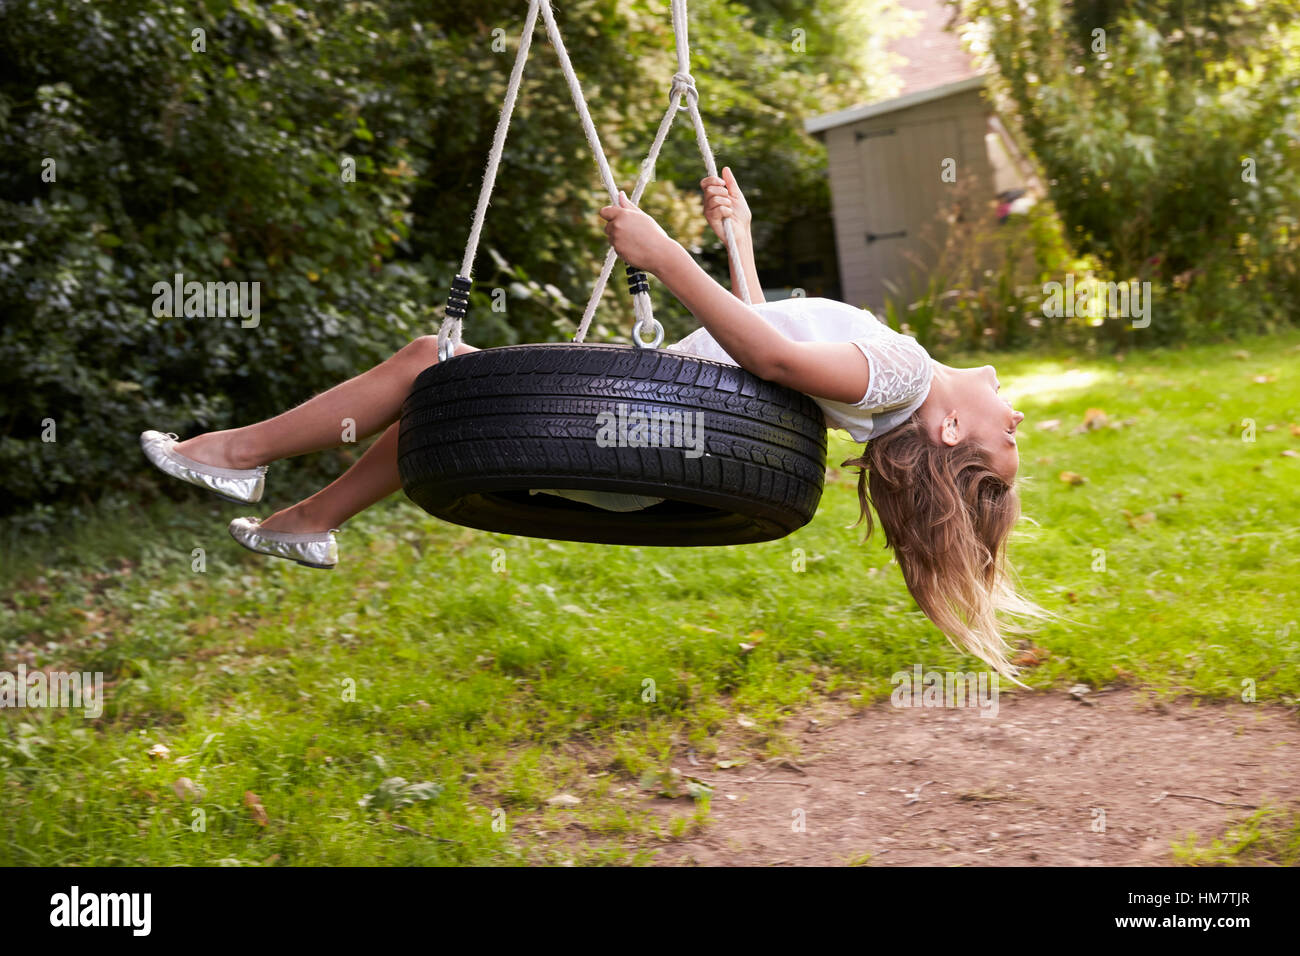 Young Girl Playing On Tire Swing In Garden Stock Photo